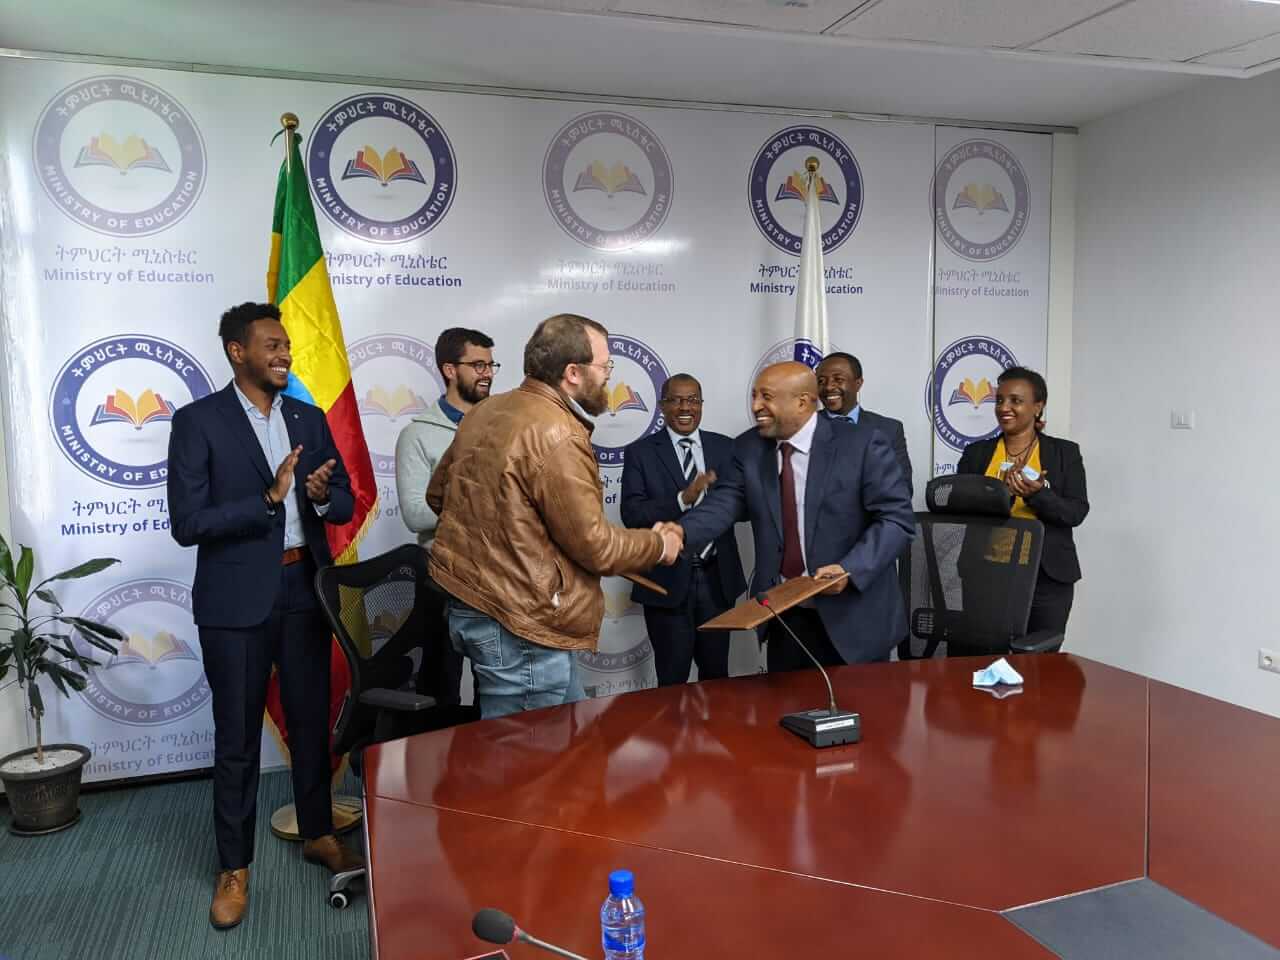 The Cardano team at Ethiopia's Ministry of Education